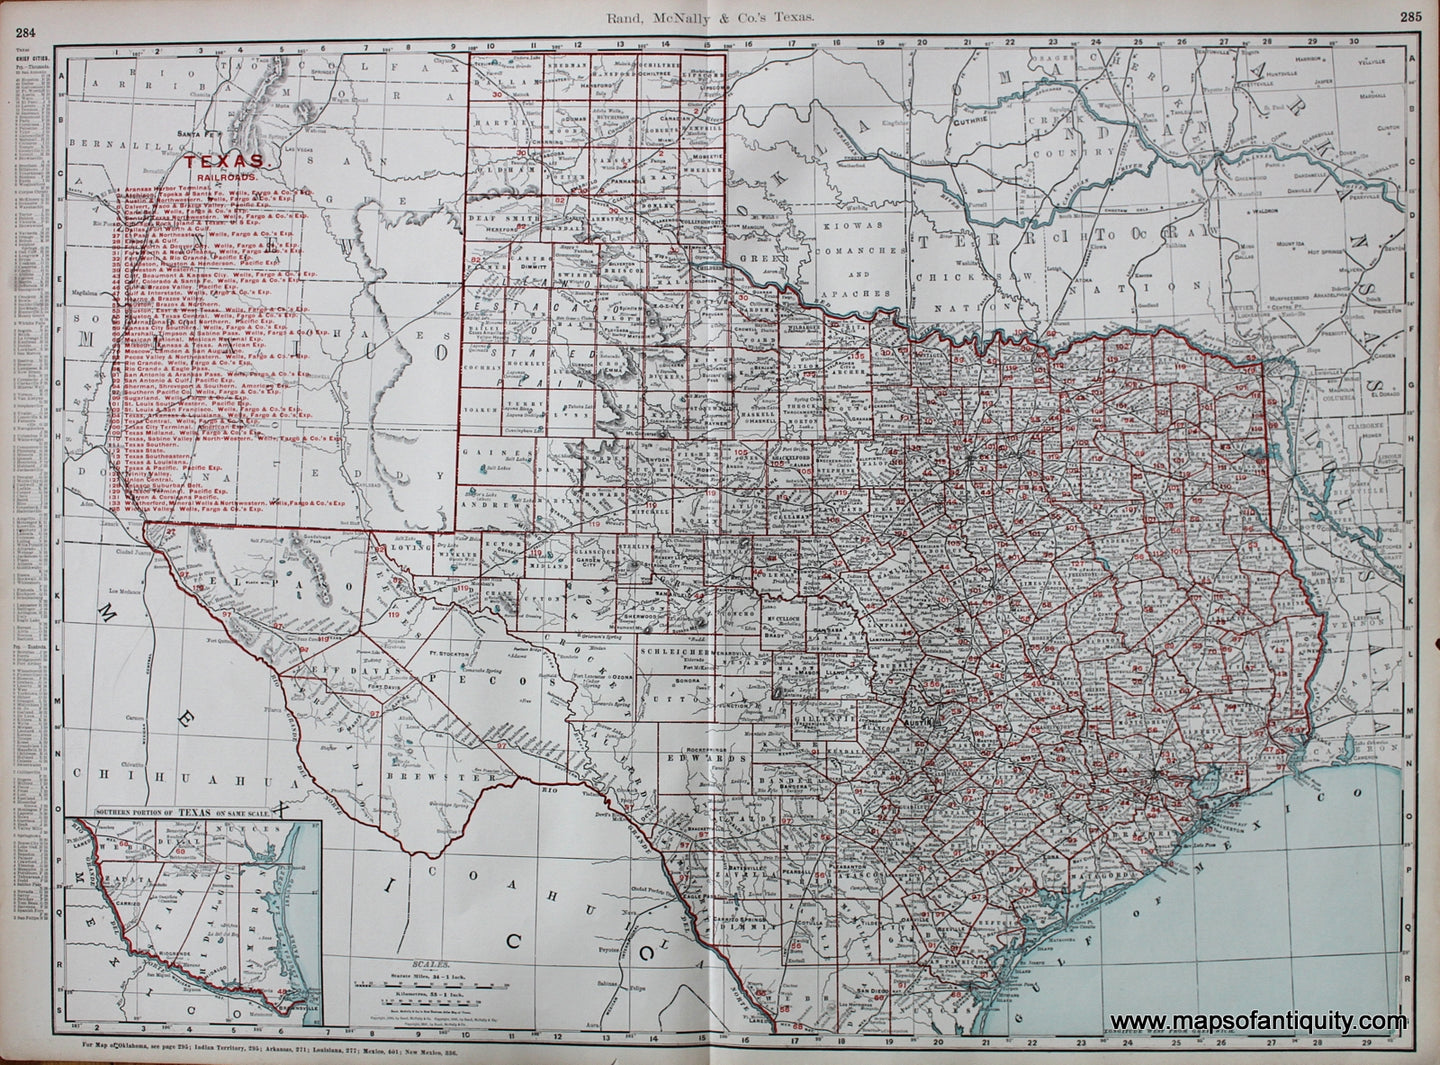 Antique-Map-Printed-Color-Texas-Railroads.**********-Texas-Railroad-Maps-1900-Rand-McNally-Maps-Of-Antiquity